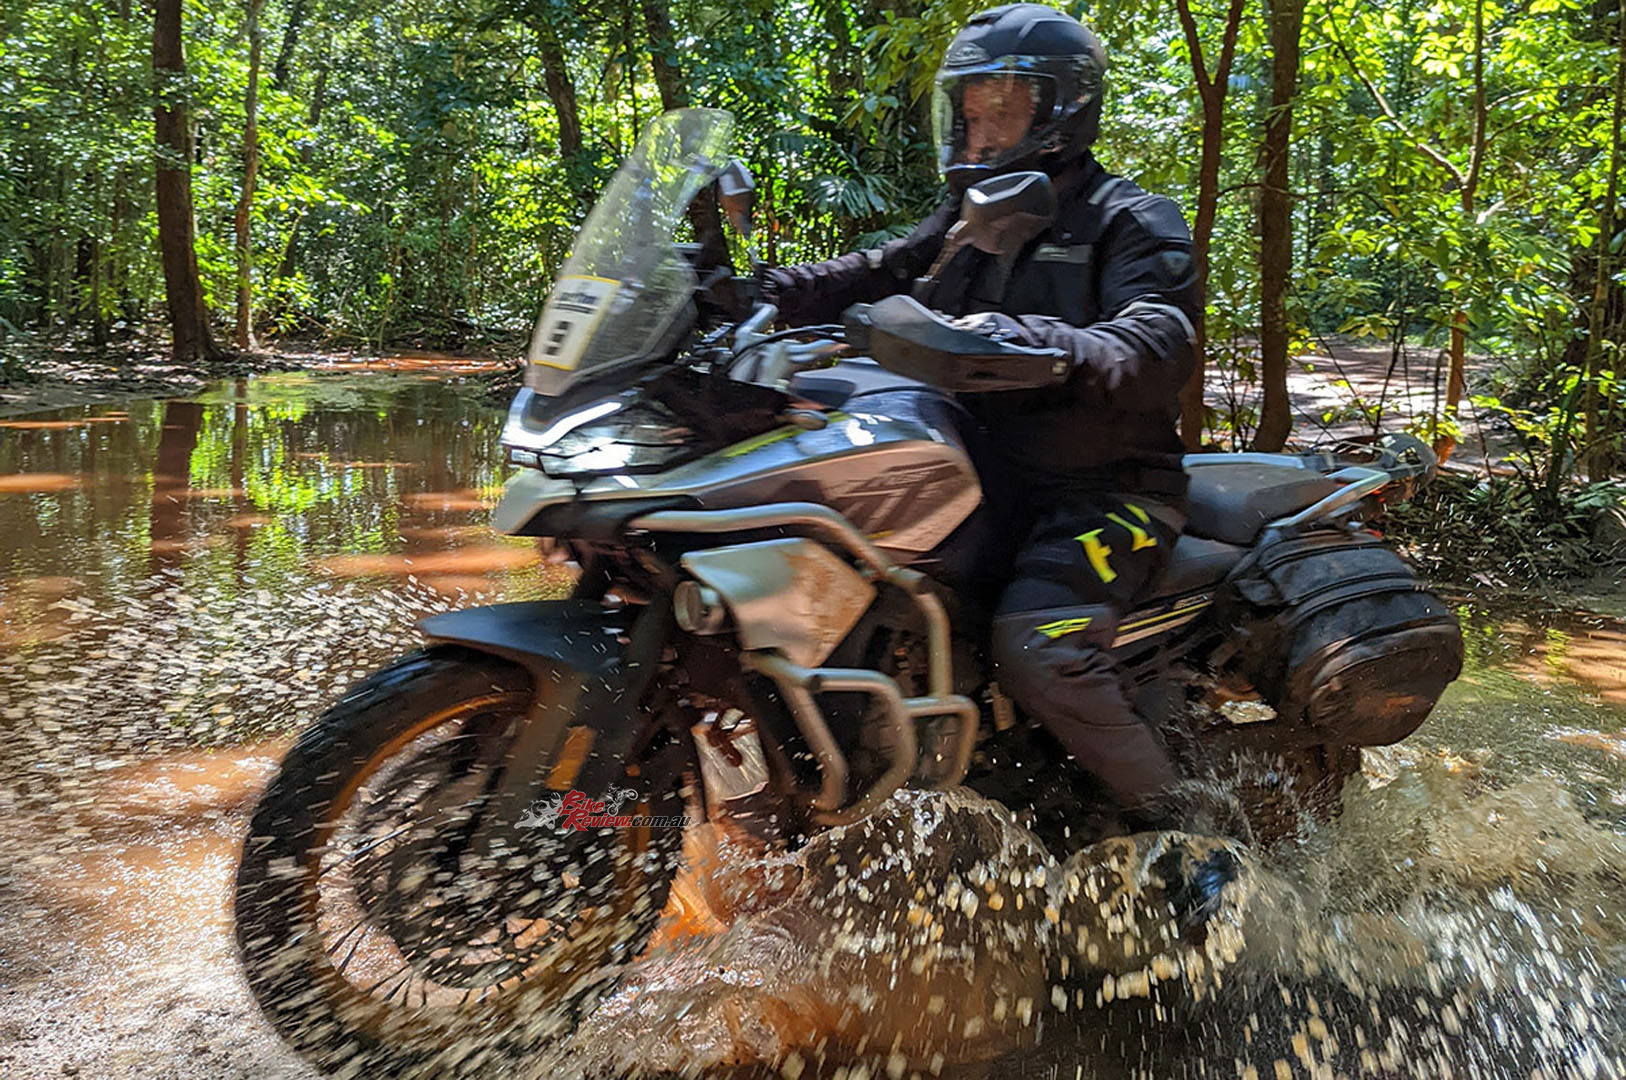 The Cape York Motorcycle Adventures 800MT Tourings are fitted with added protection in the form of crash bars and a headlight guard.